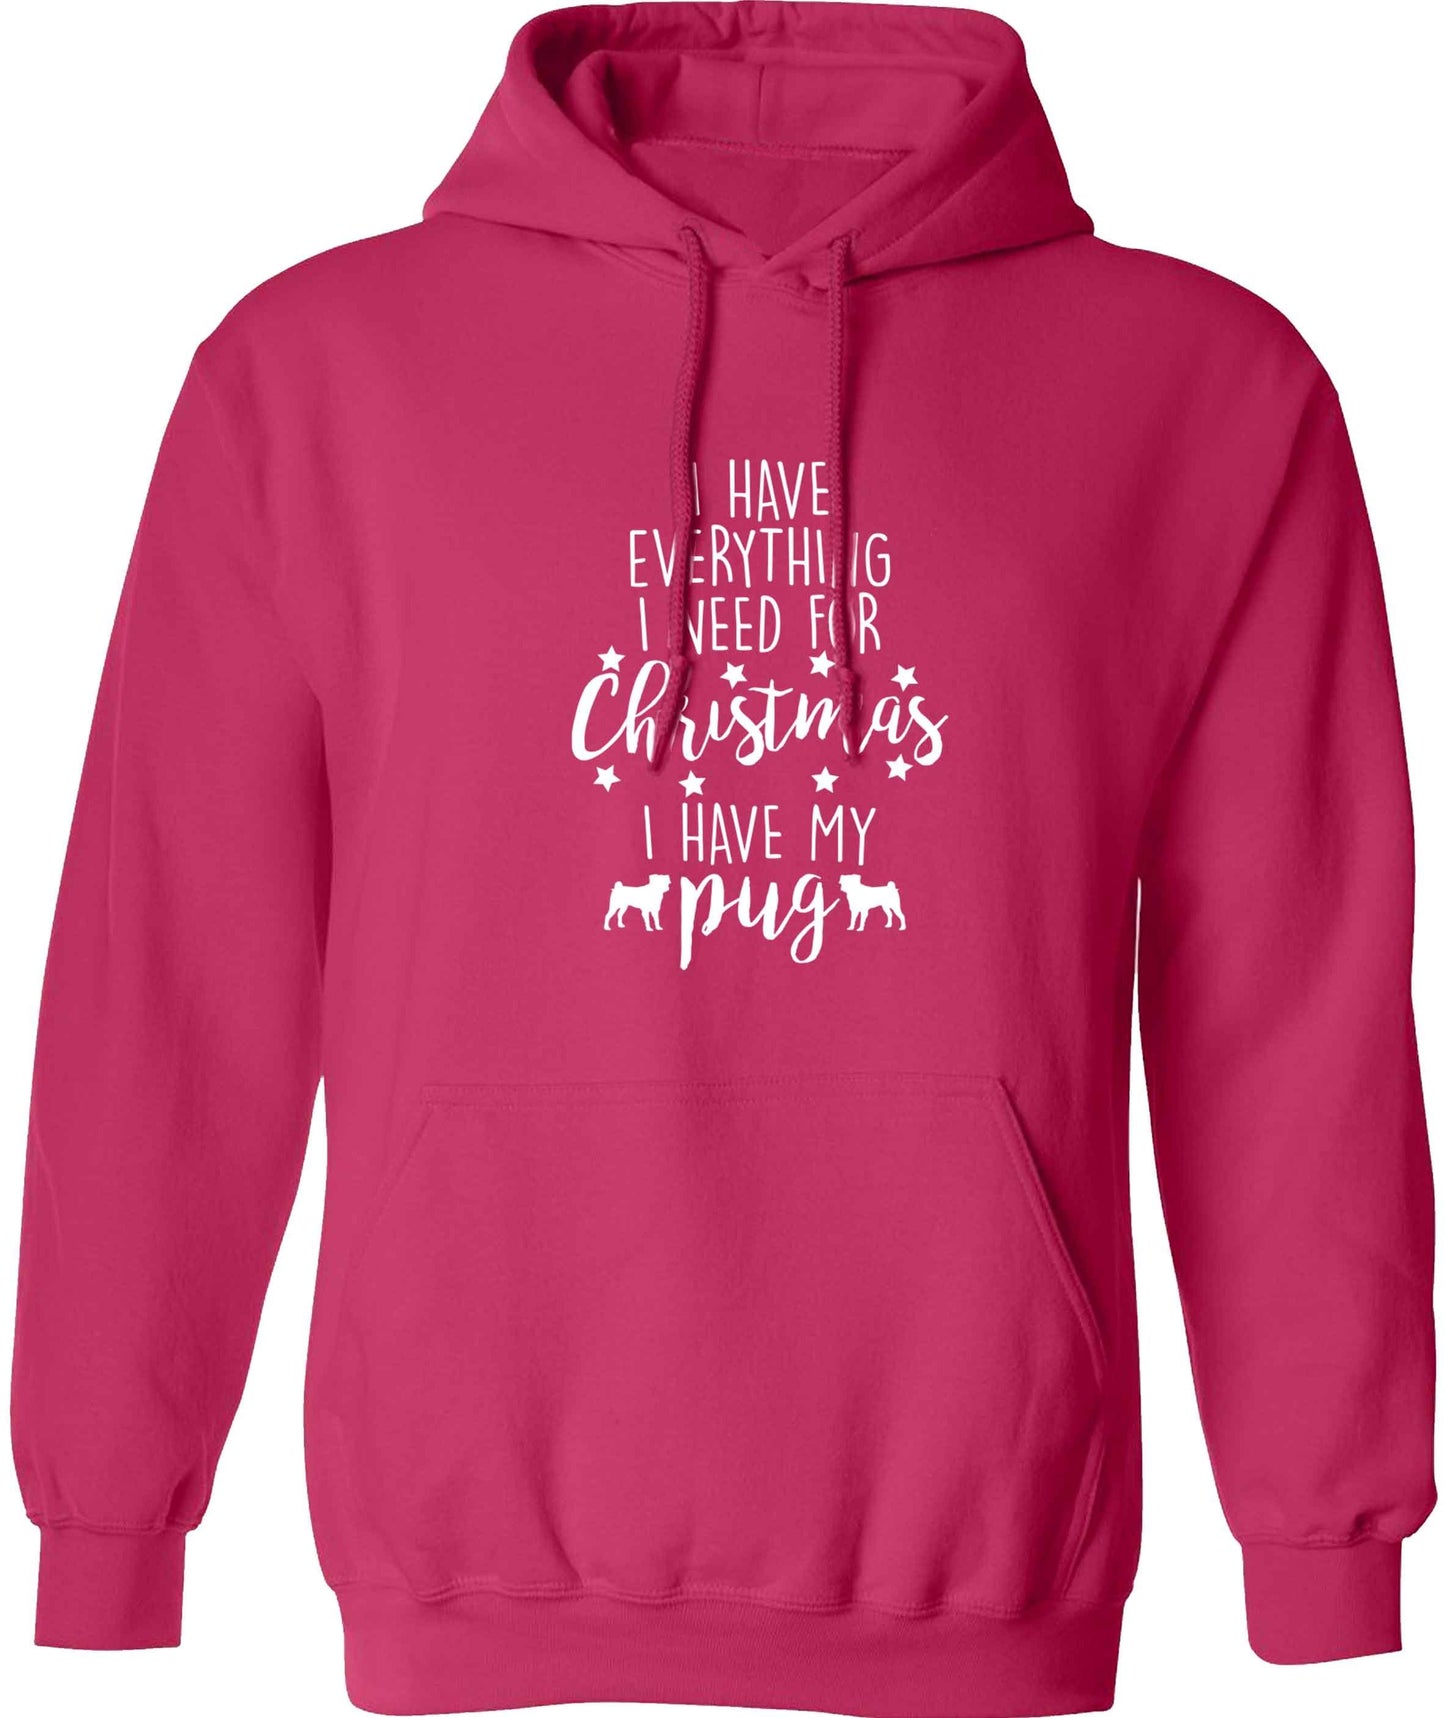 I have everything I need for Christmas I have my pug adults unisex pink hoodie 2XL